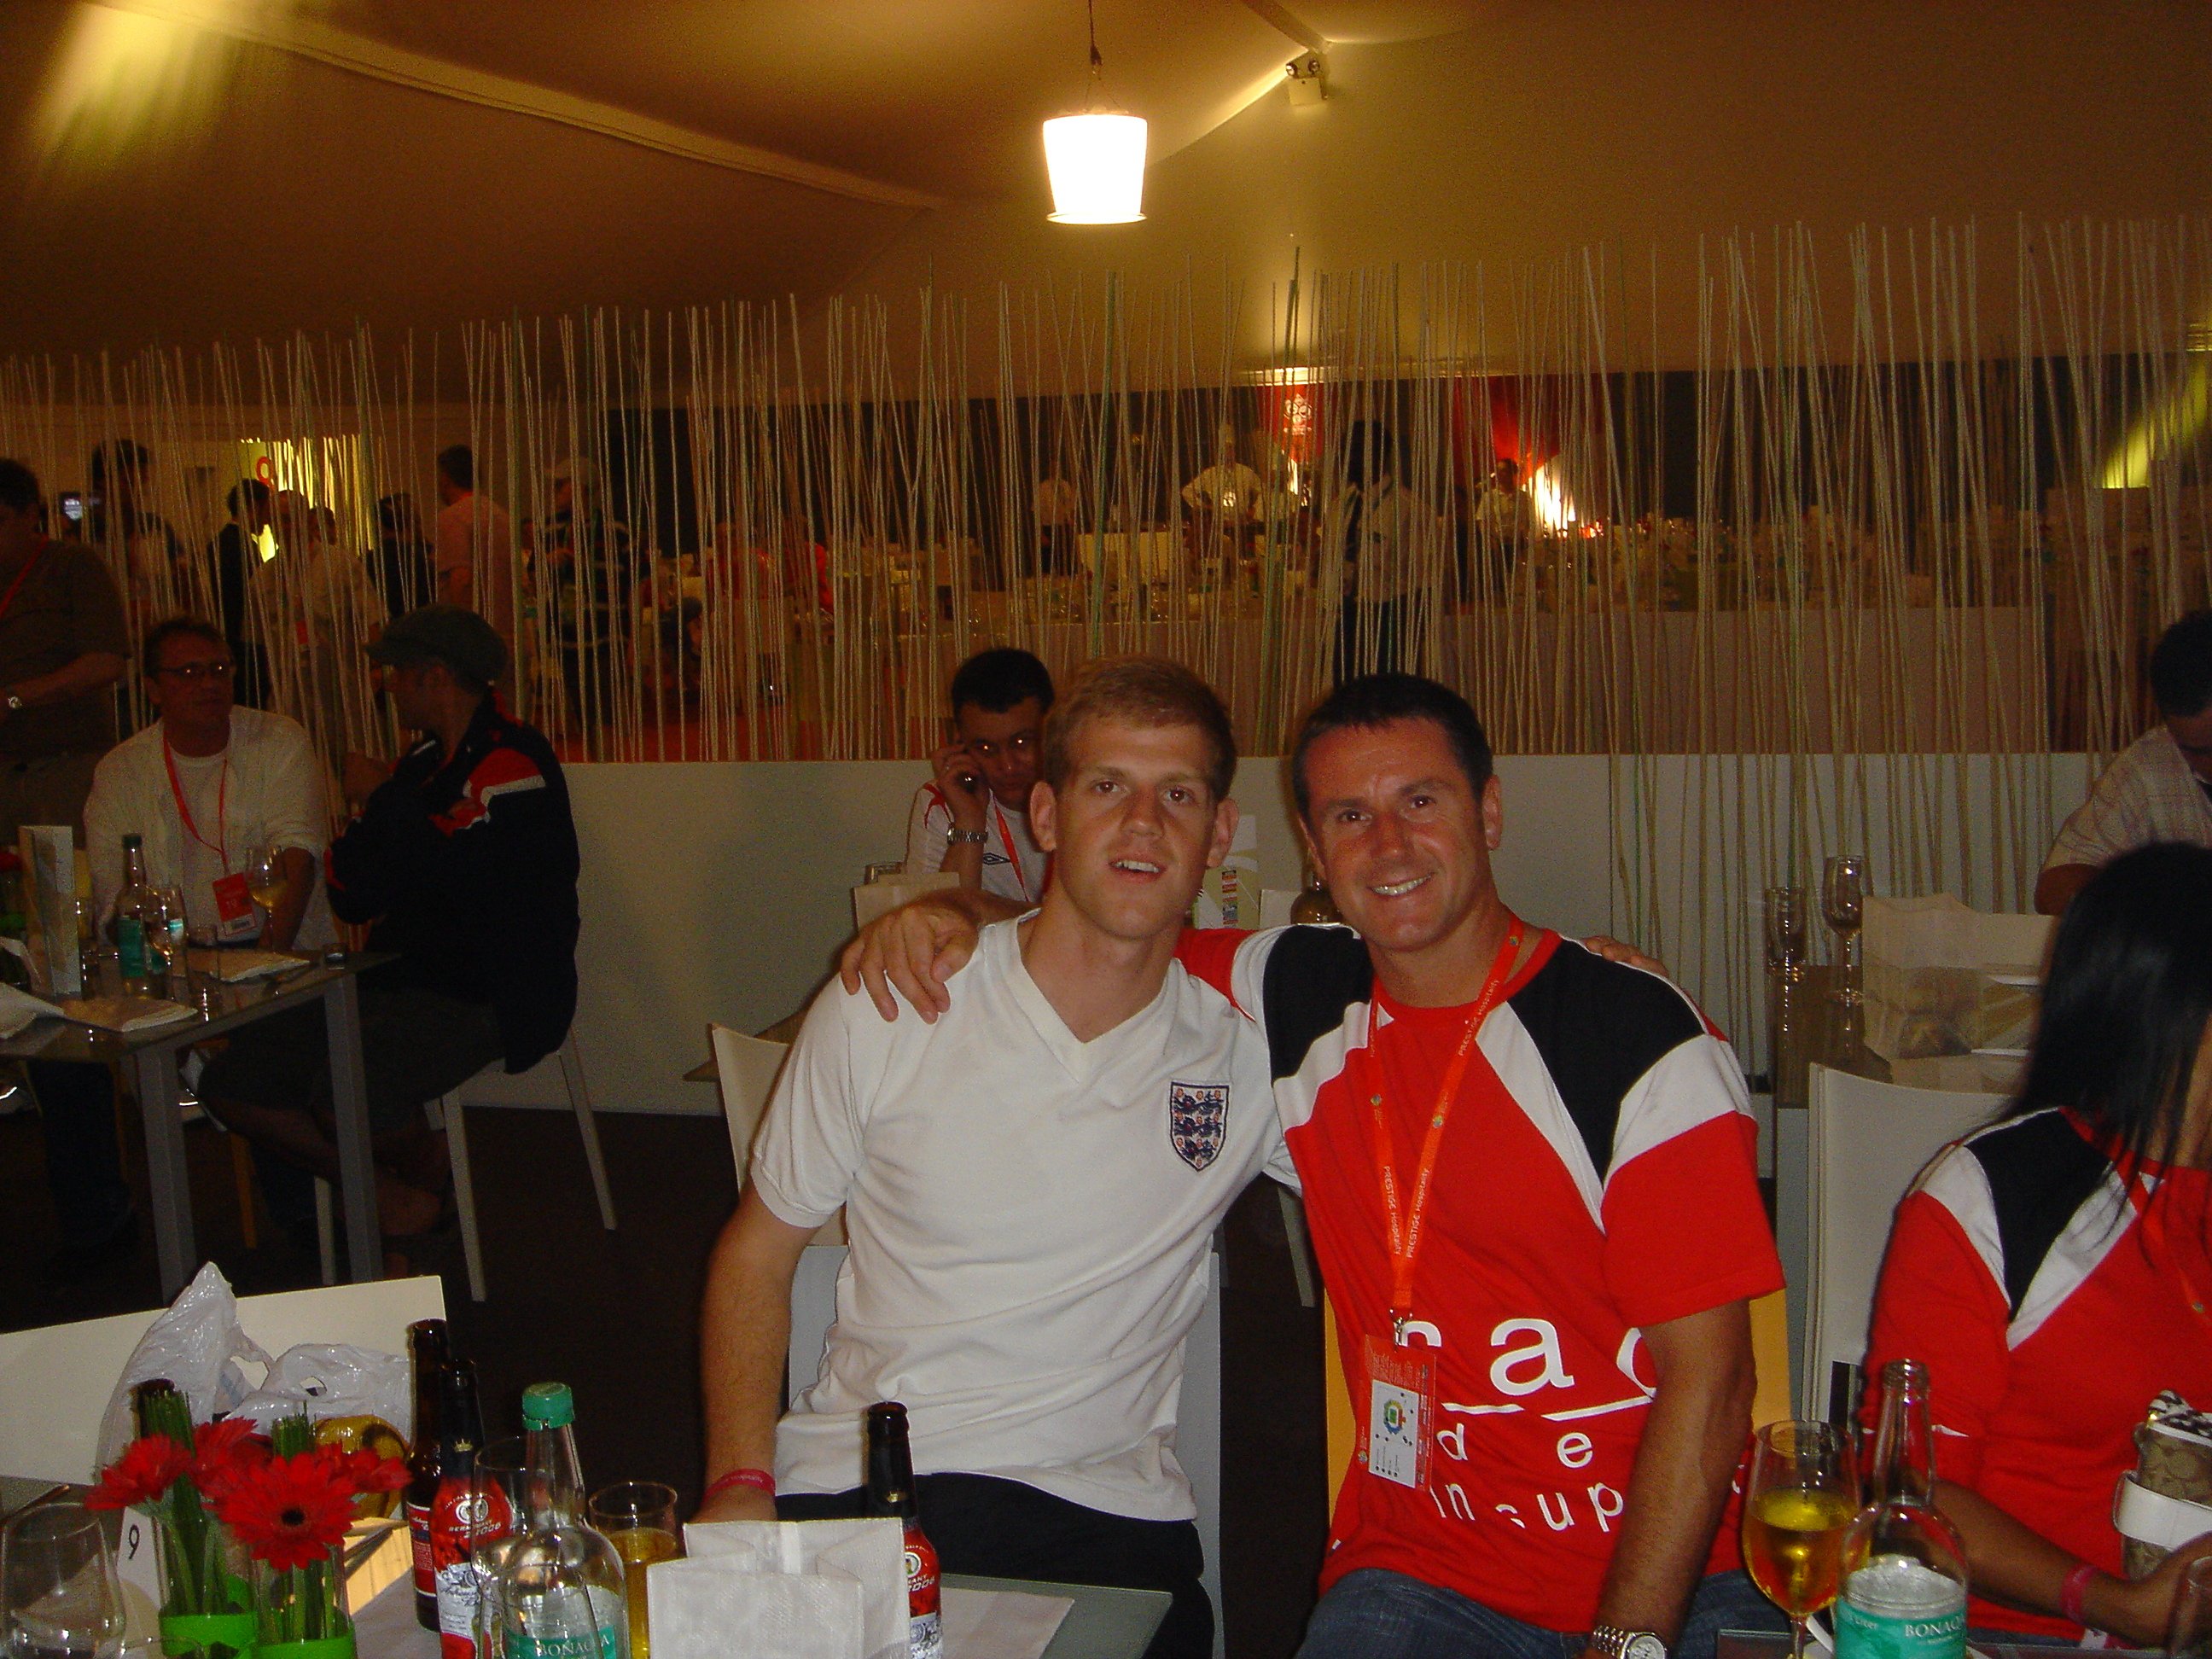 From Left: George Fenwick sport his England shirt while his father Terry sport his Soca Warriors shirt during the England vs Trinidad and Tobago WC game in Germany 2006.